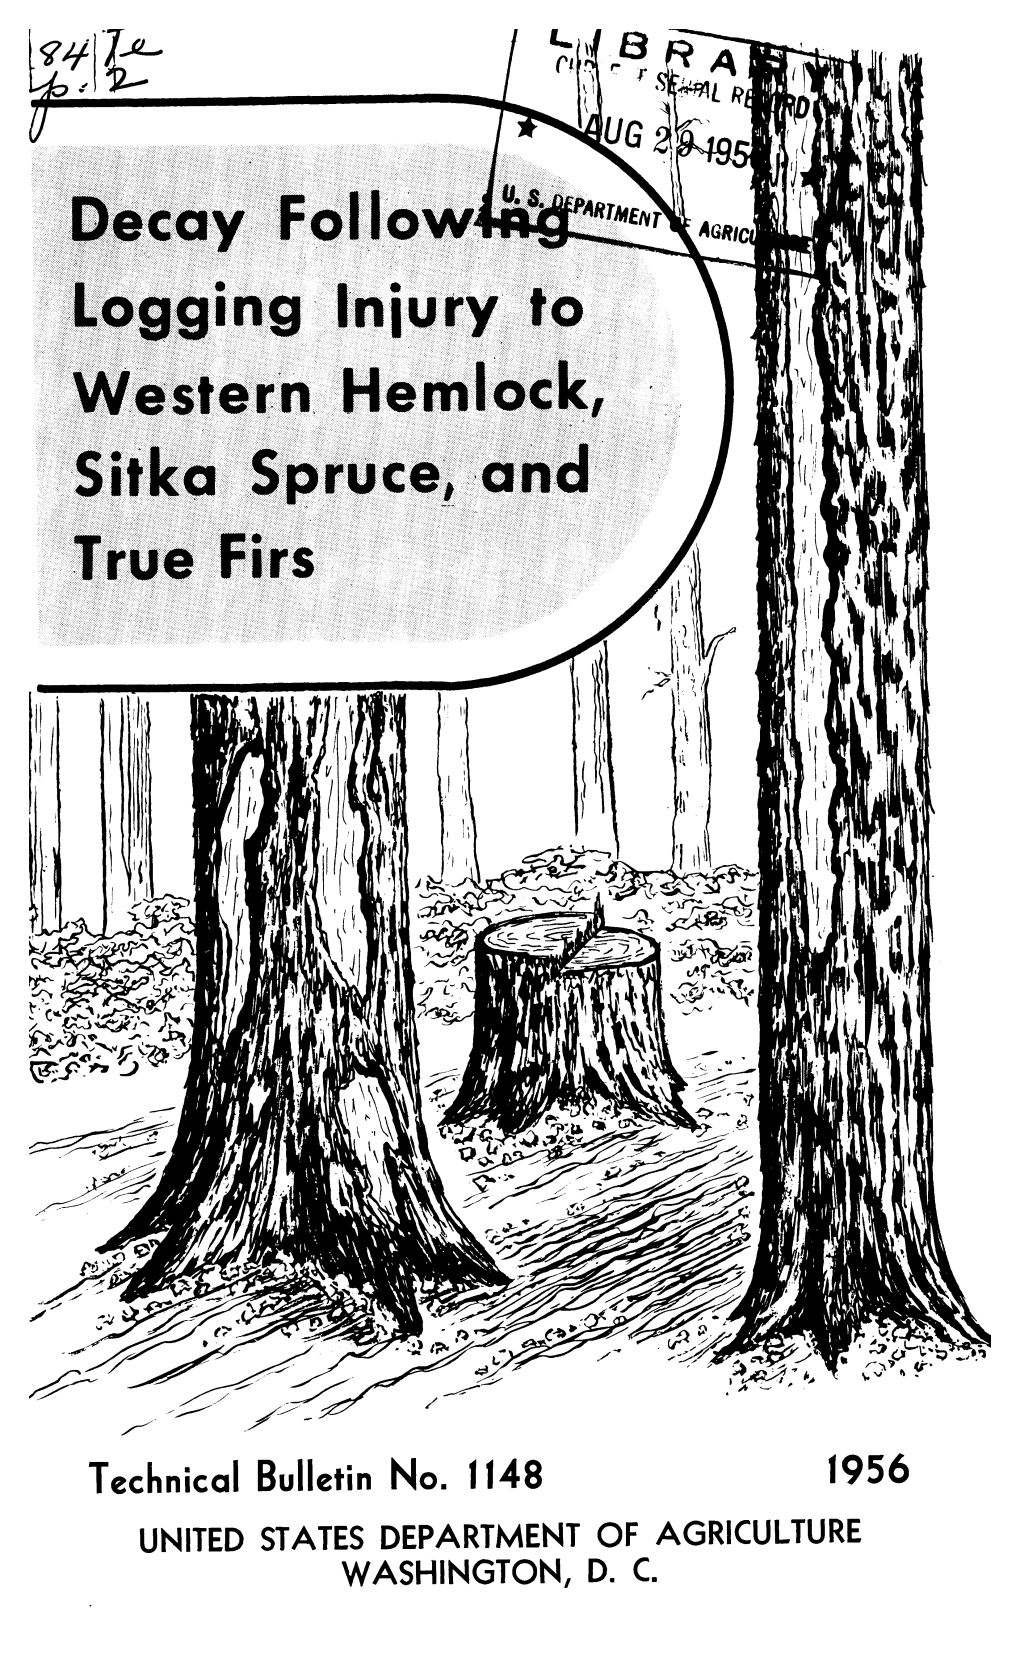 Decay Follow^ Logging Injury to Western Hemlock, Sitka Spruce, and True Firs